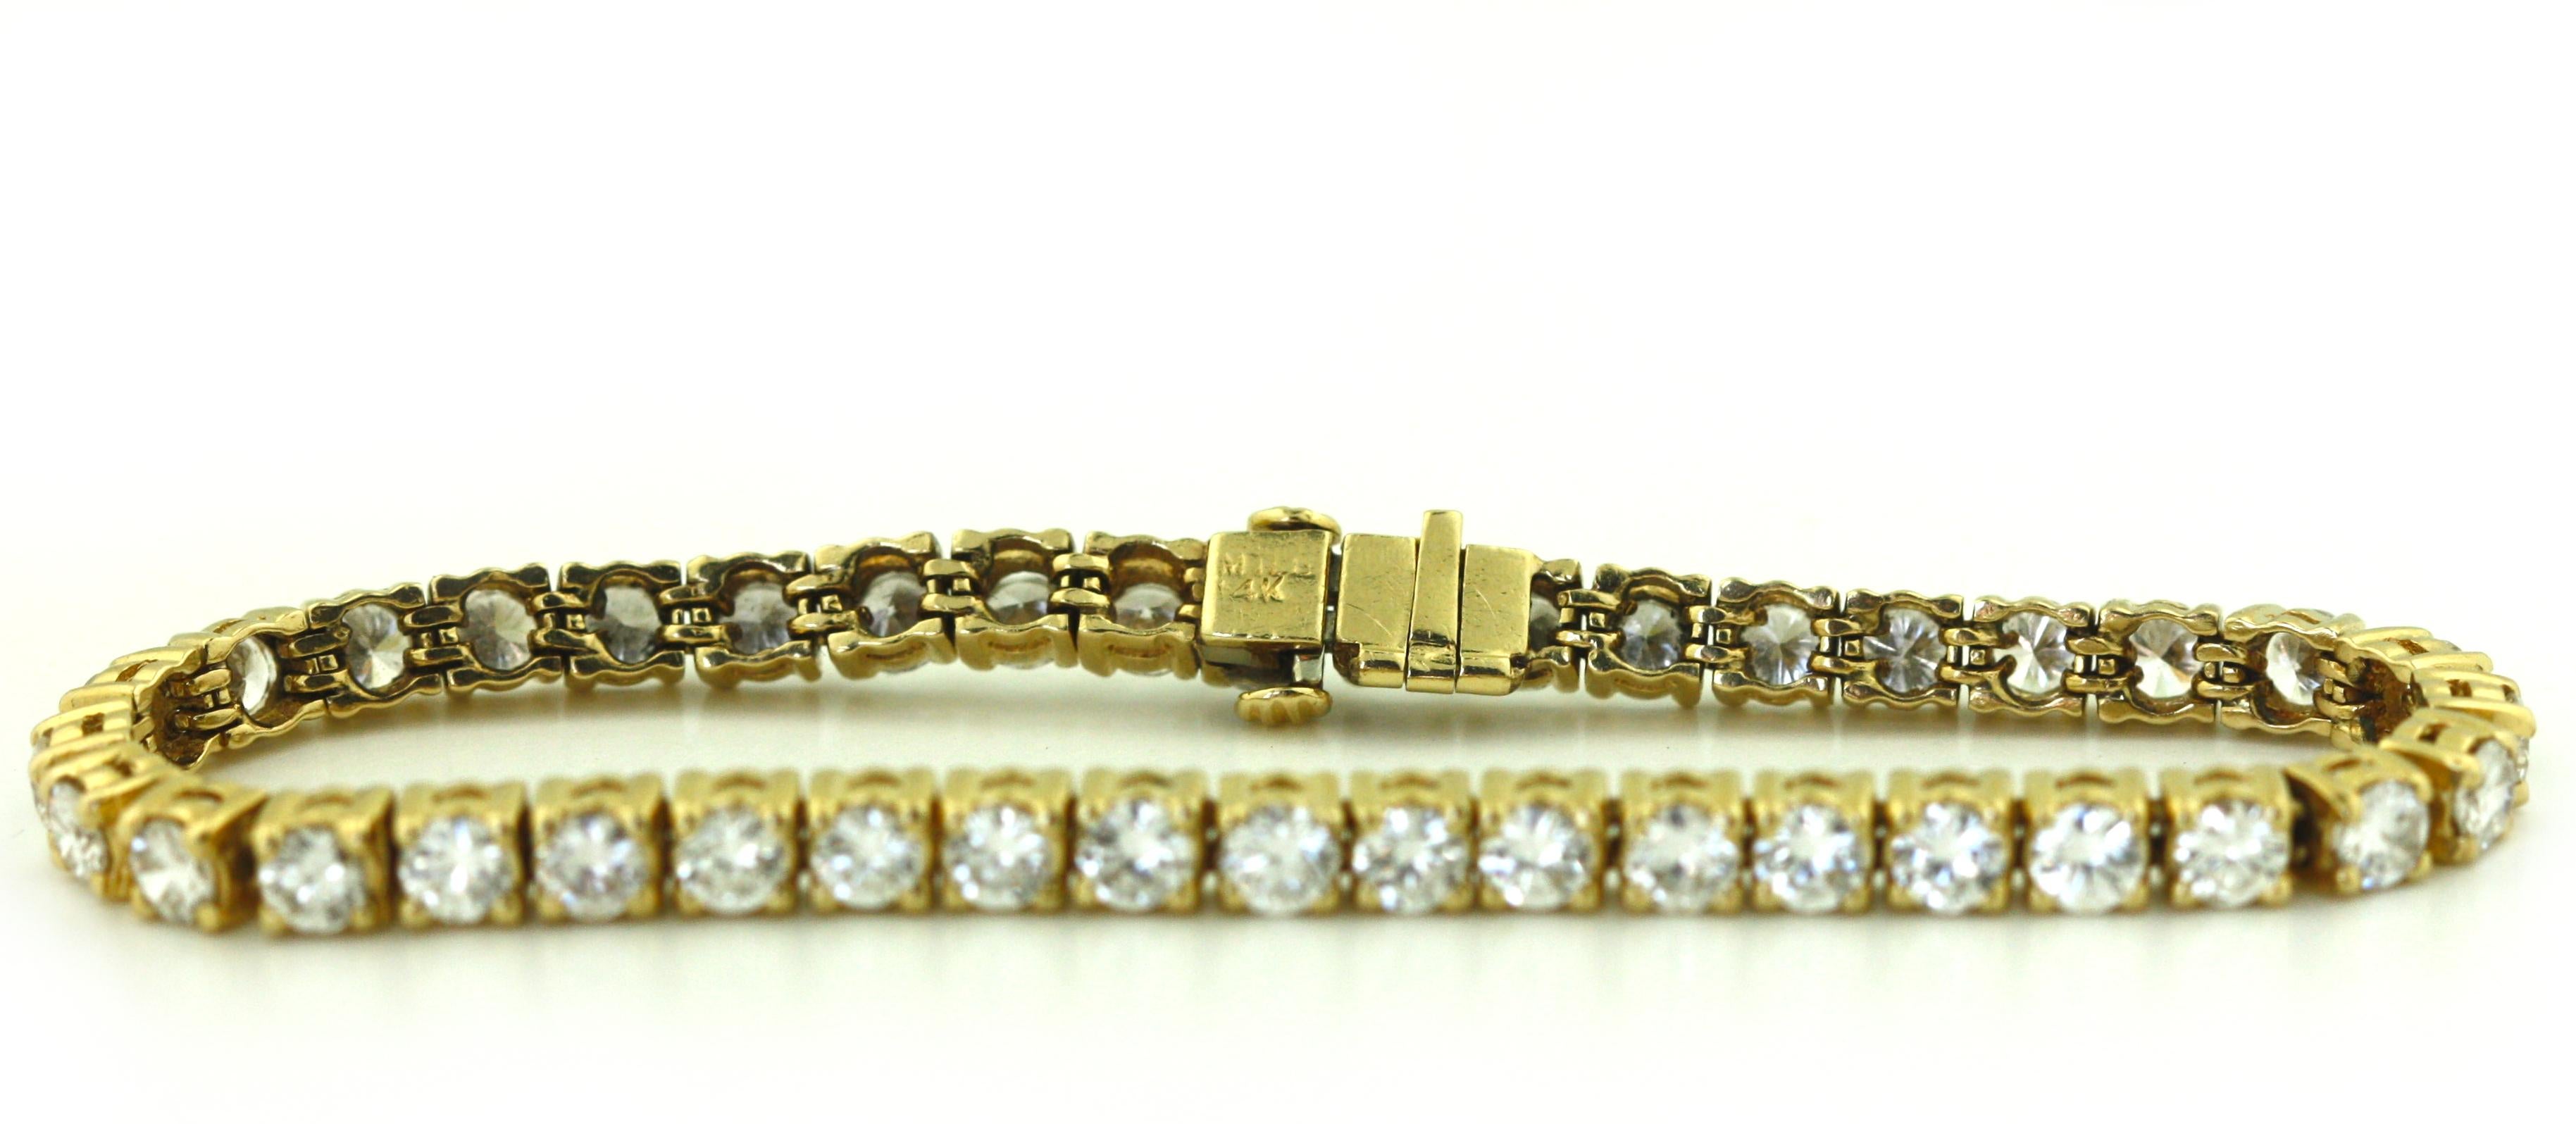 Yellow Gold and 9.80ct Diamond Tennis Bracelet
Set with 40 round brilliant cut diamonds.
Diamonds weighing a total of approximately 9.80 carats
14 karat yellow gold
Total weight 15.08 grams
Length 7 inches